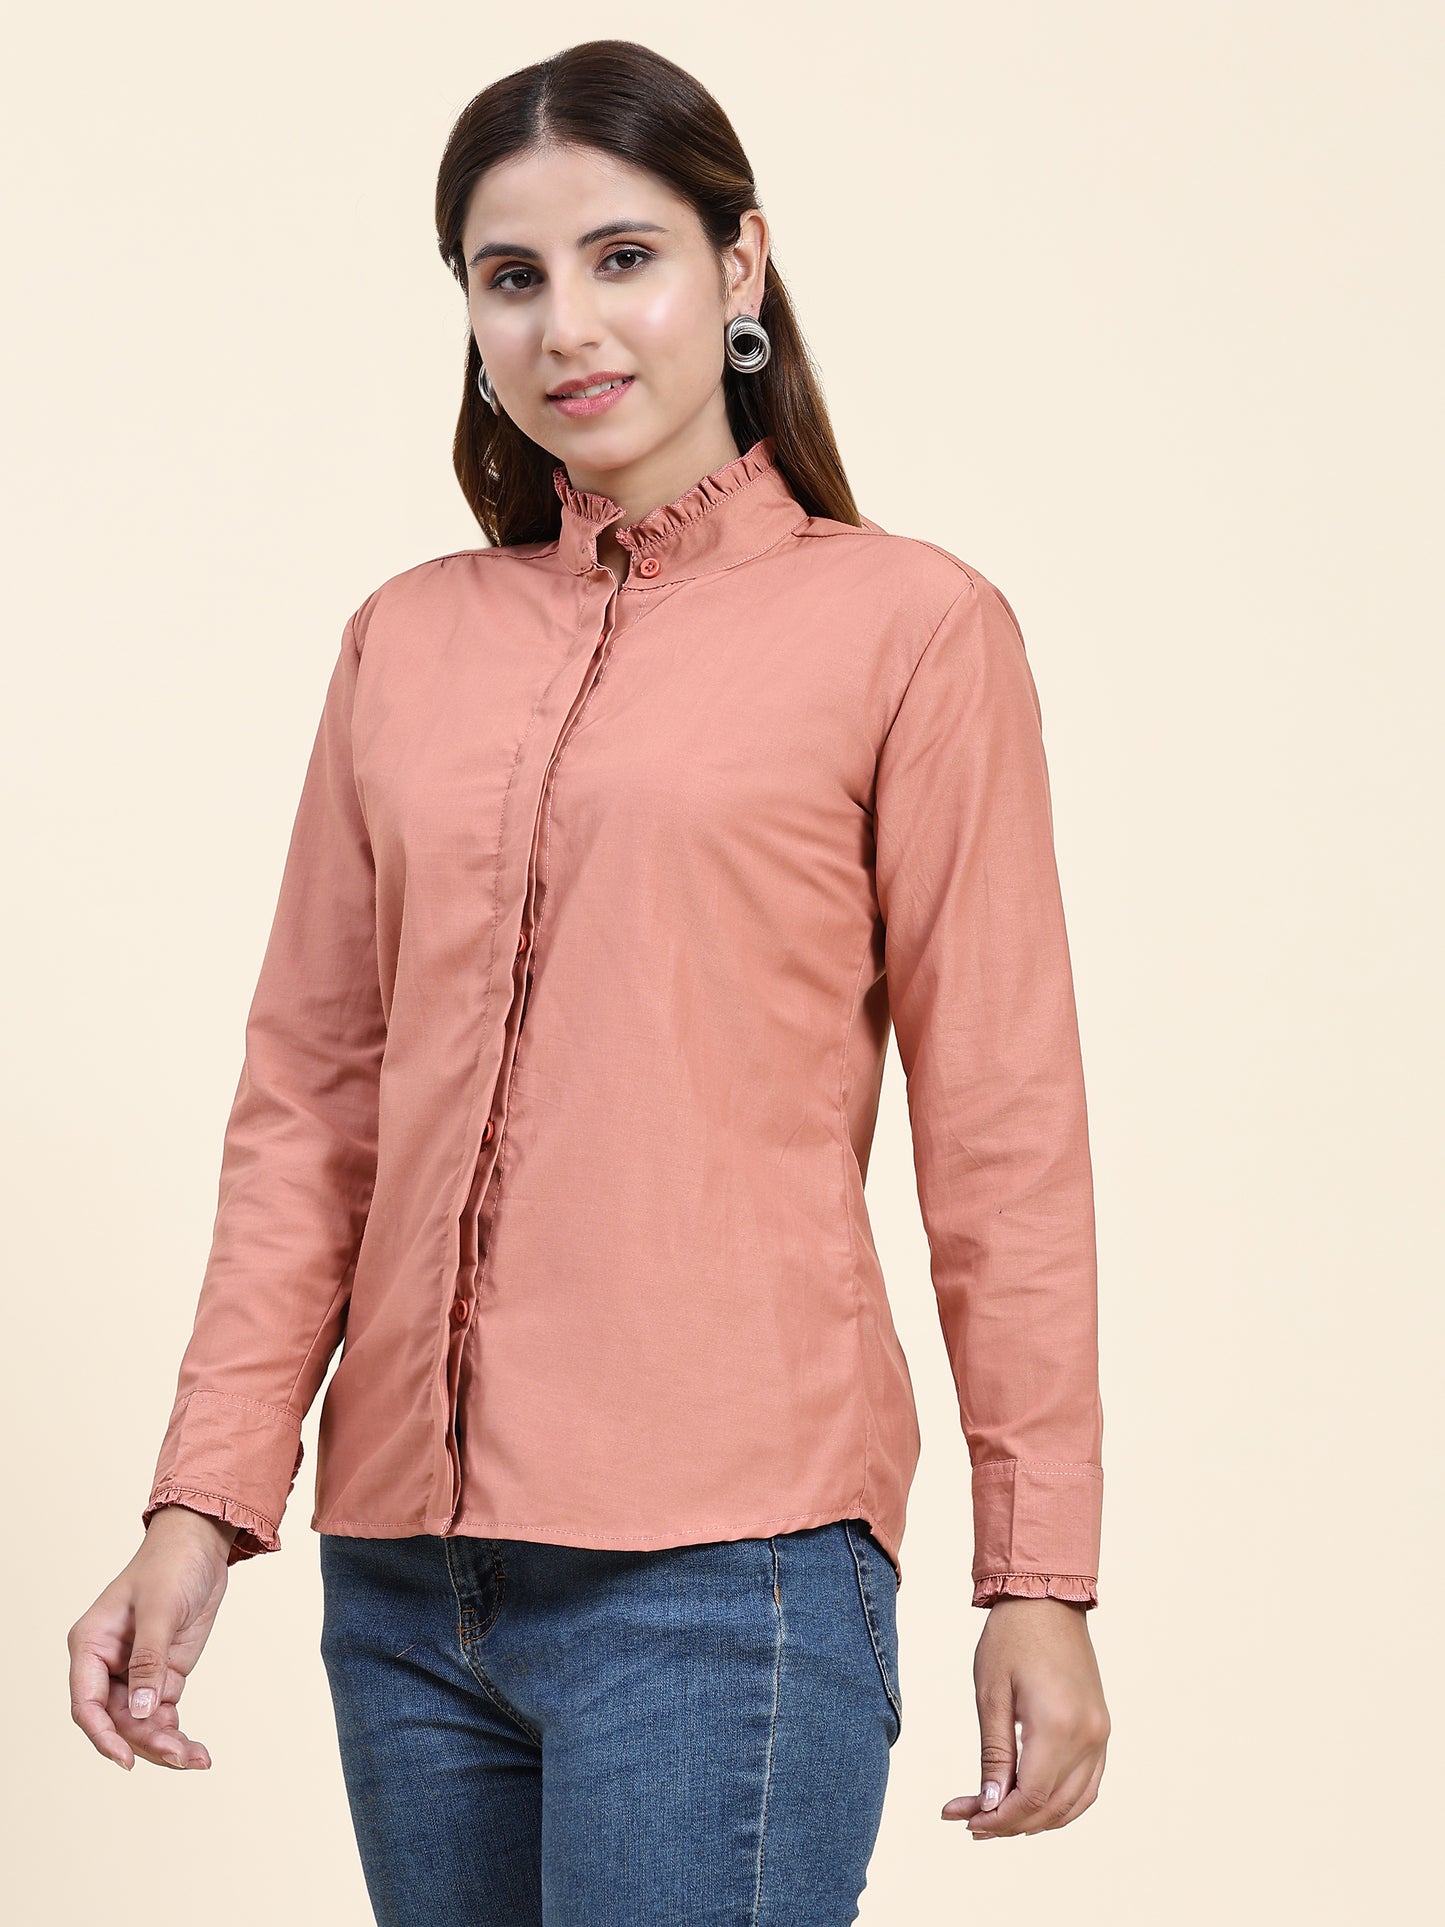 ANUSHIL Women's Cotton Shirts : Comfortable and Fashionable with Gathered Neck and Sleeves, Brown